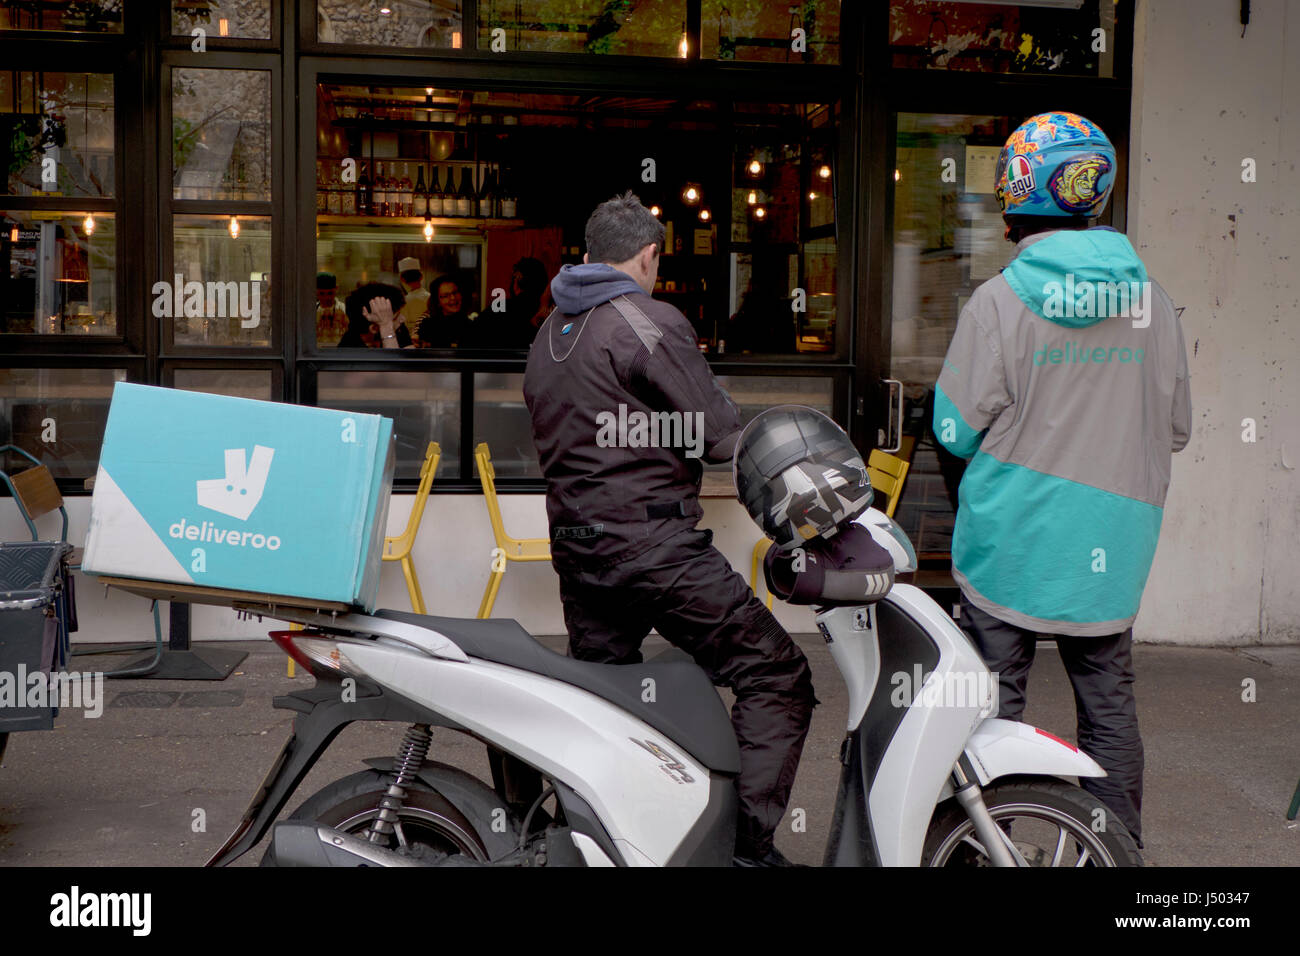 Deliveroo couriers waiting for food from a restaurant by Peckham Rye station in London,UK Stock Photo